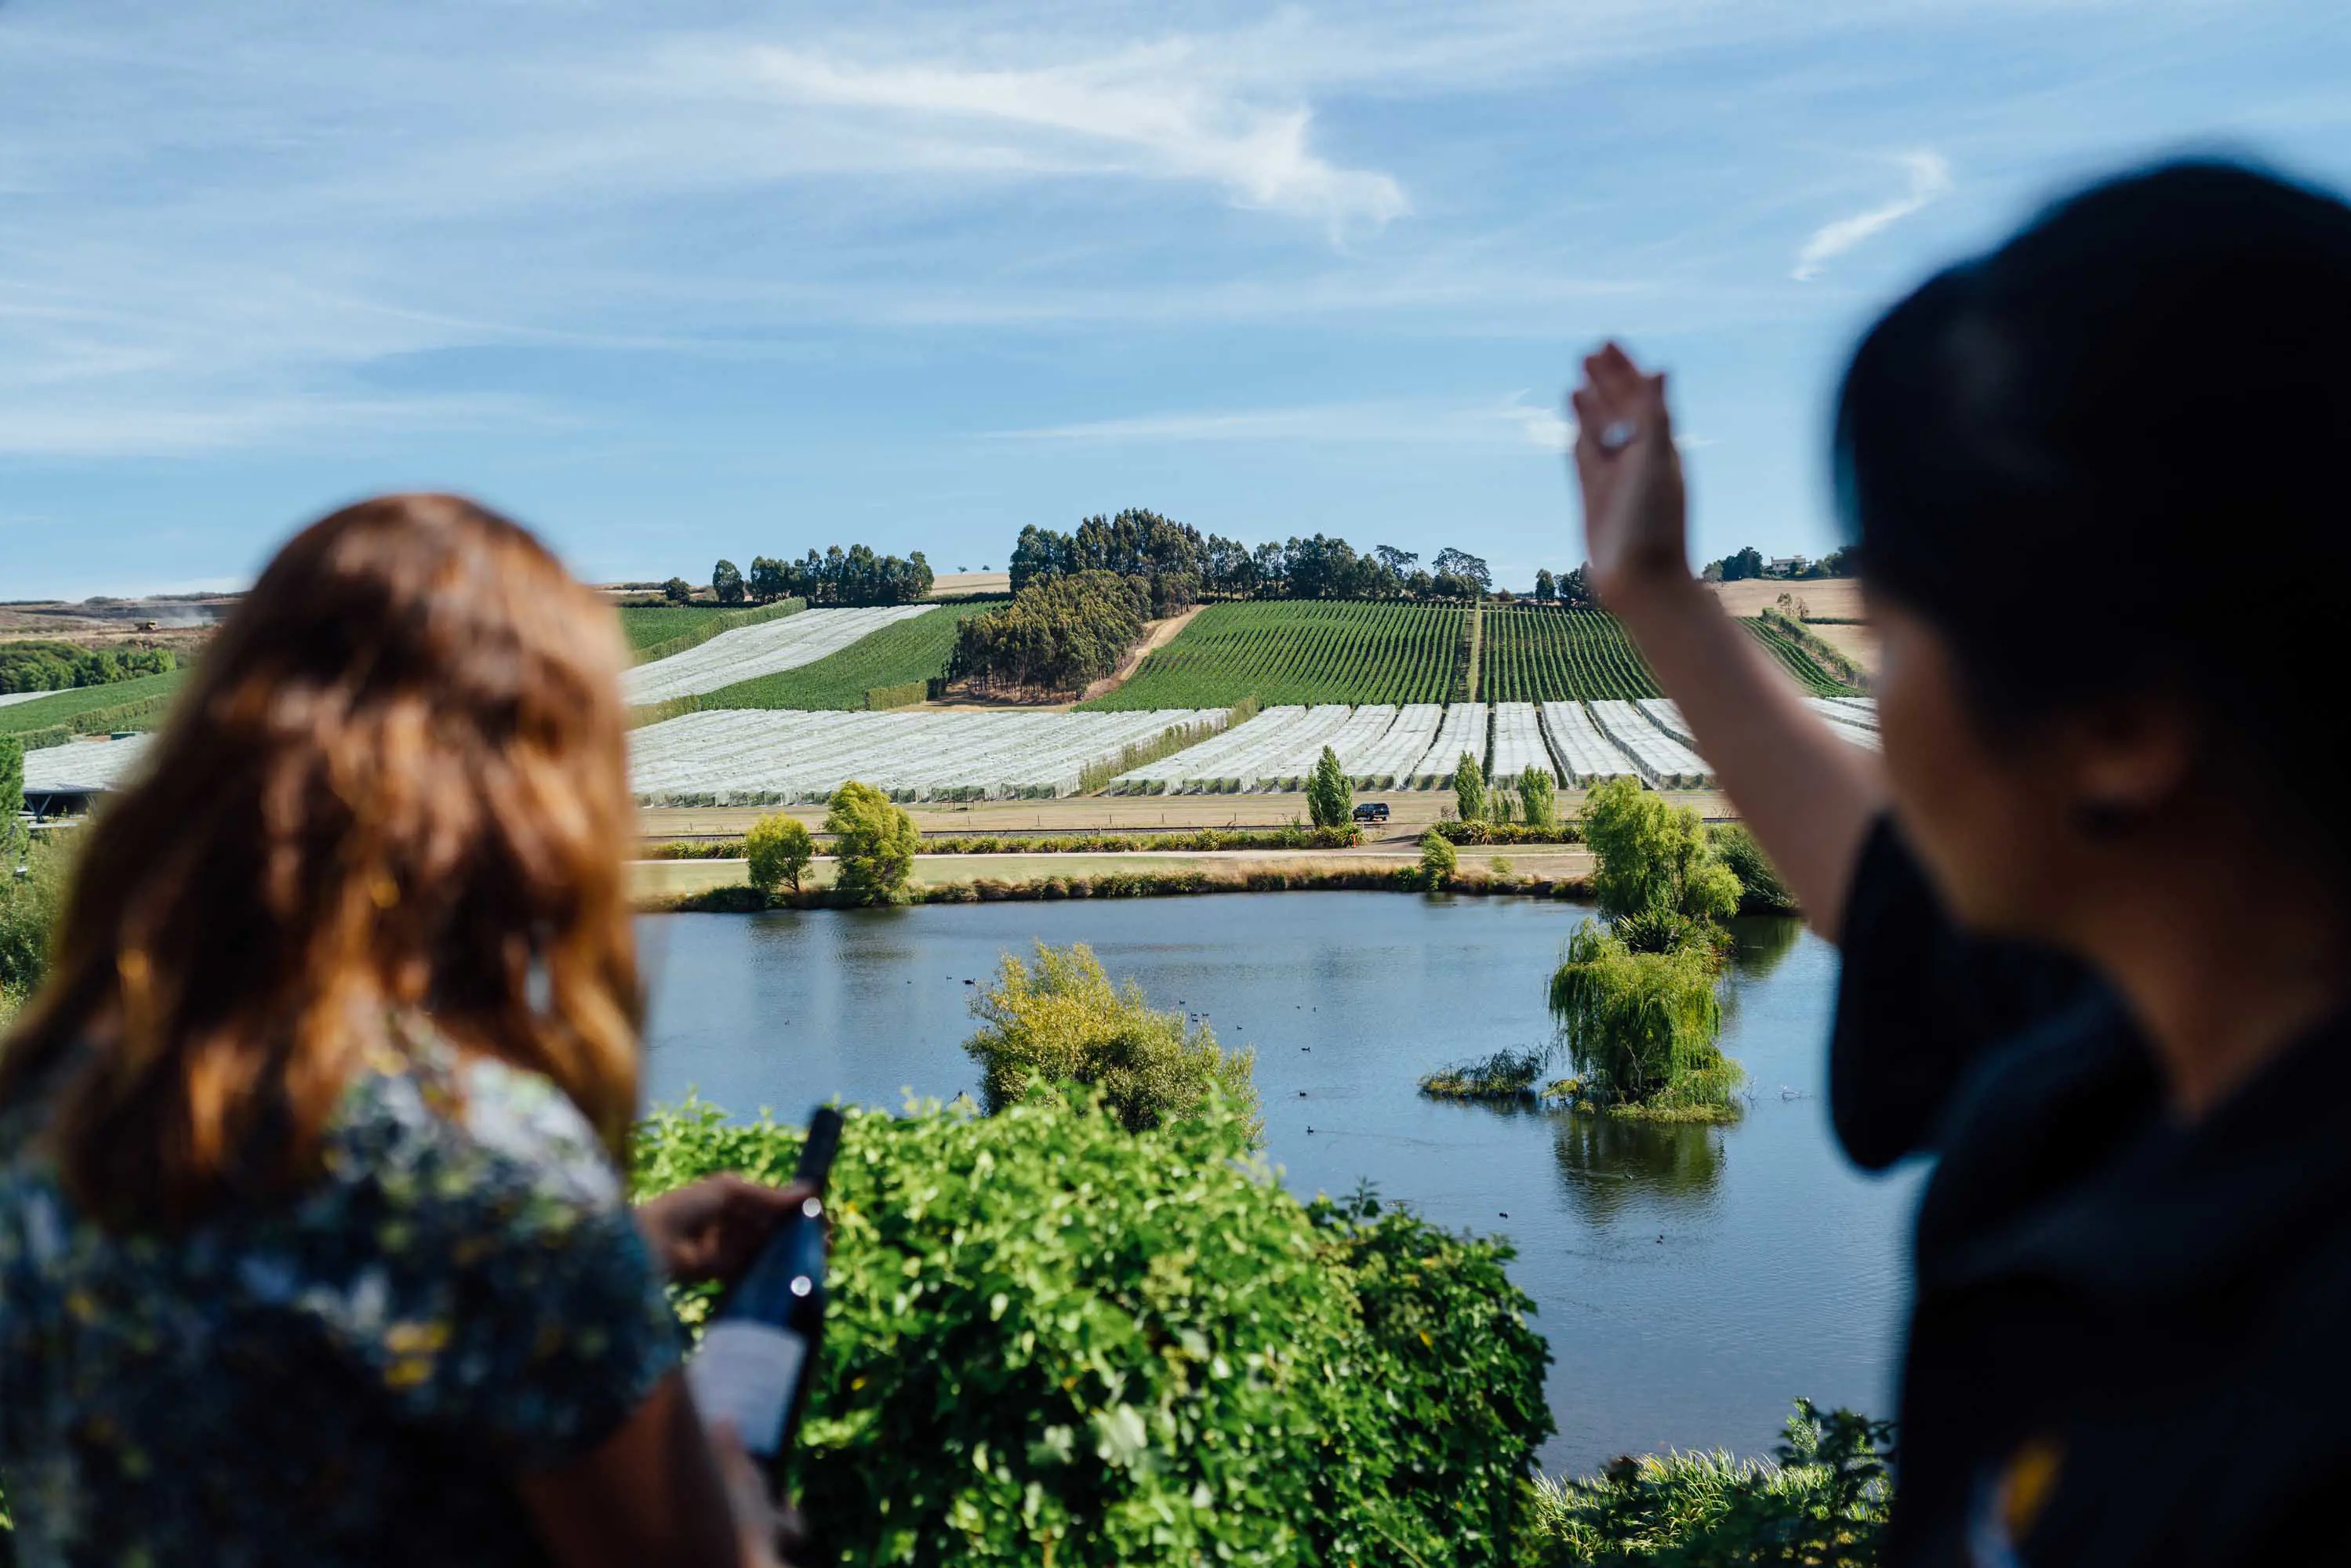 Two women stand in the foreground and look over a small lake with a vineyard stretching over hills in the distance.